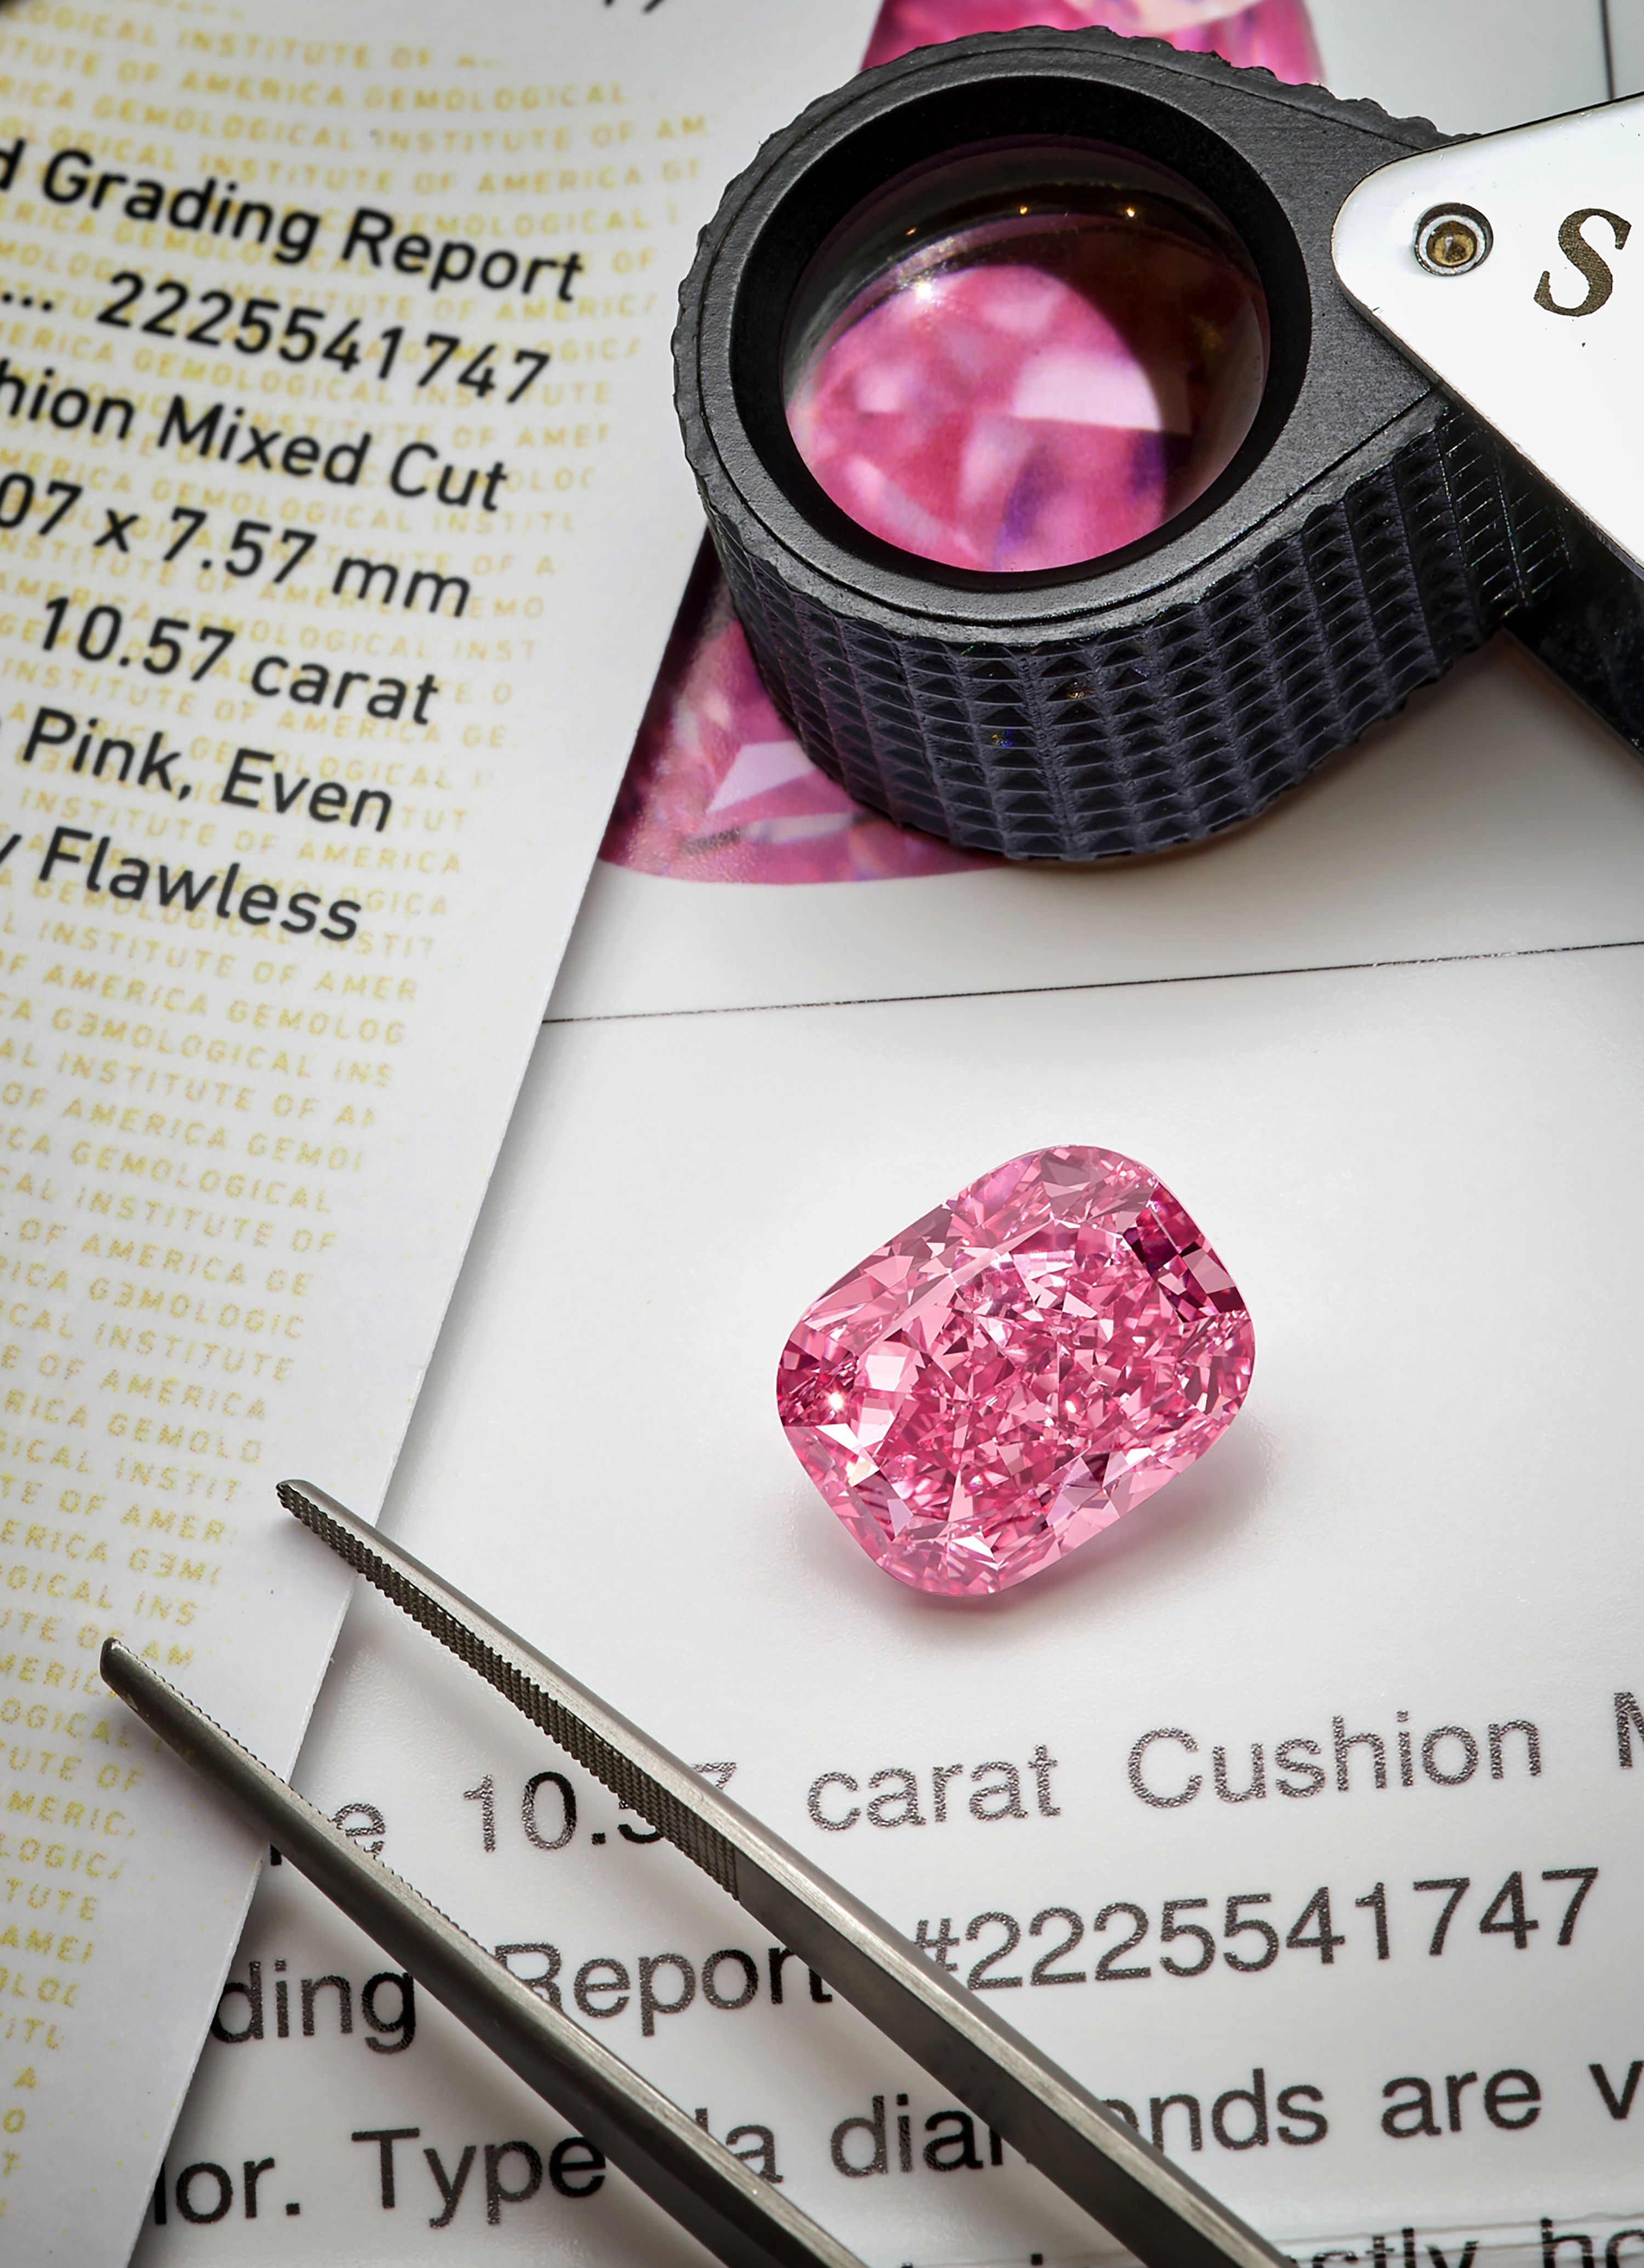 Why are pink diamonds so popular? From multimillion-dollar sales